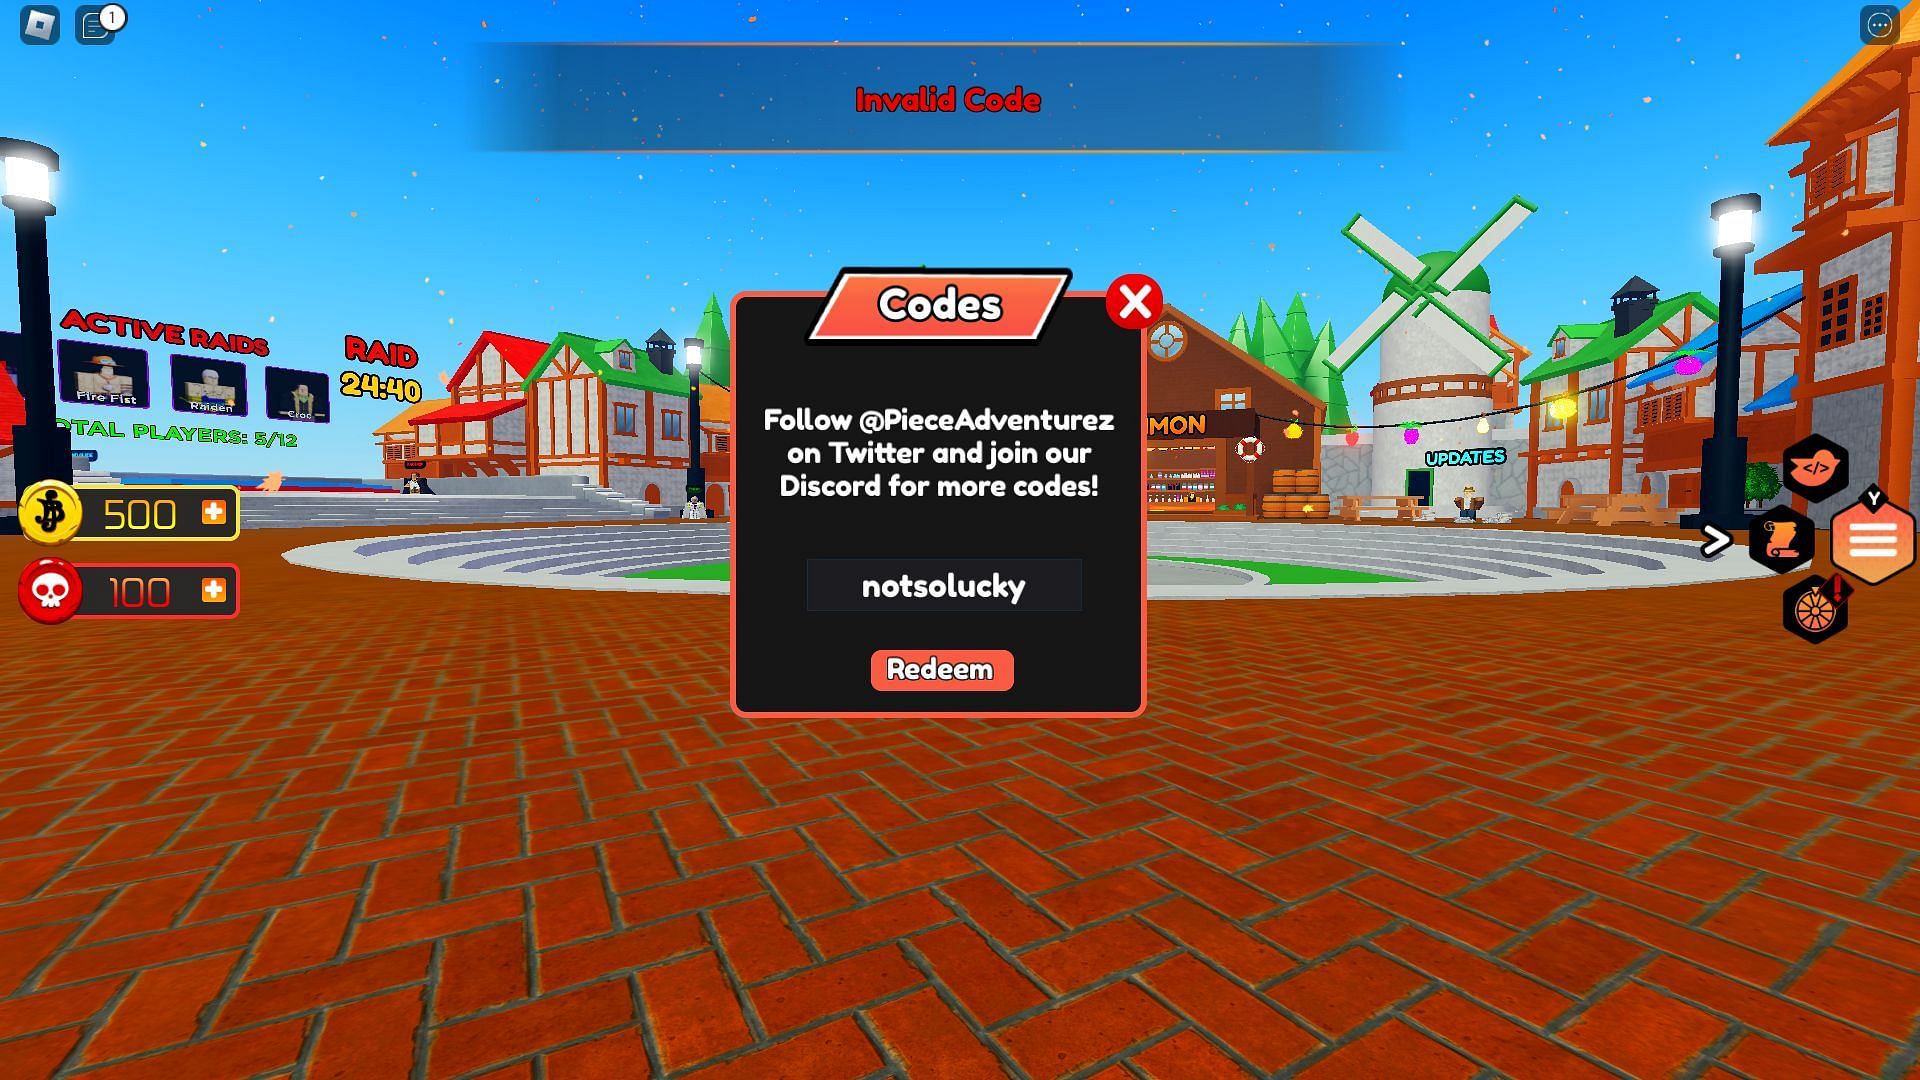 Troubleshooting codes for Piece Adventures Simulator (Image via Roblox)